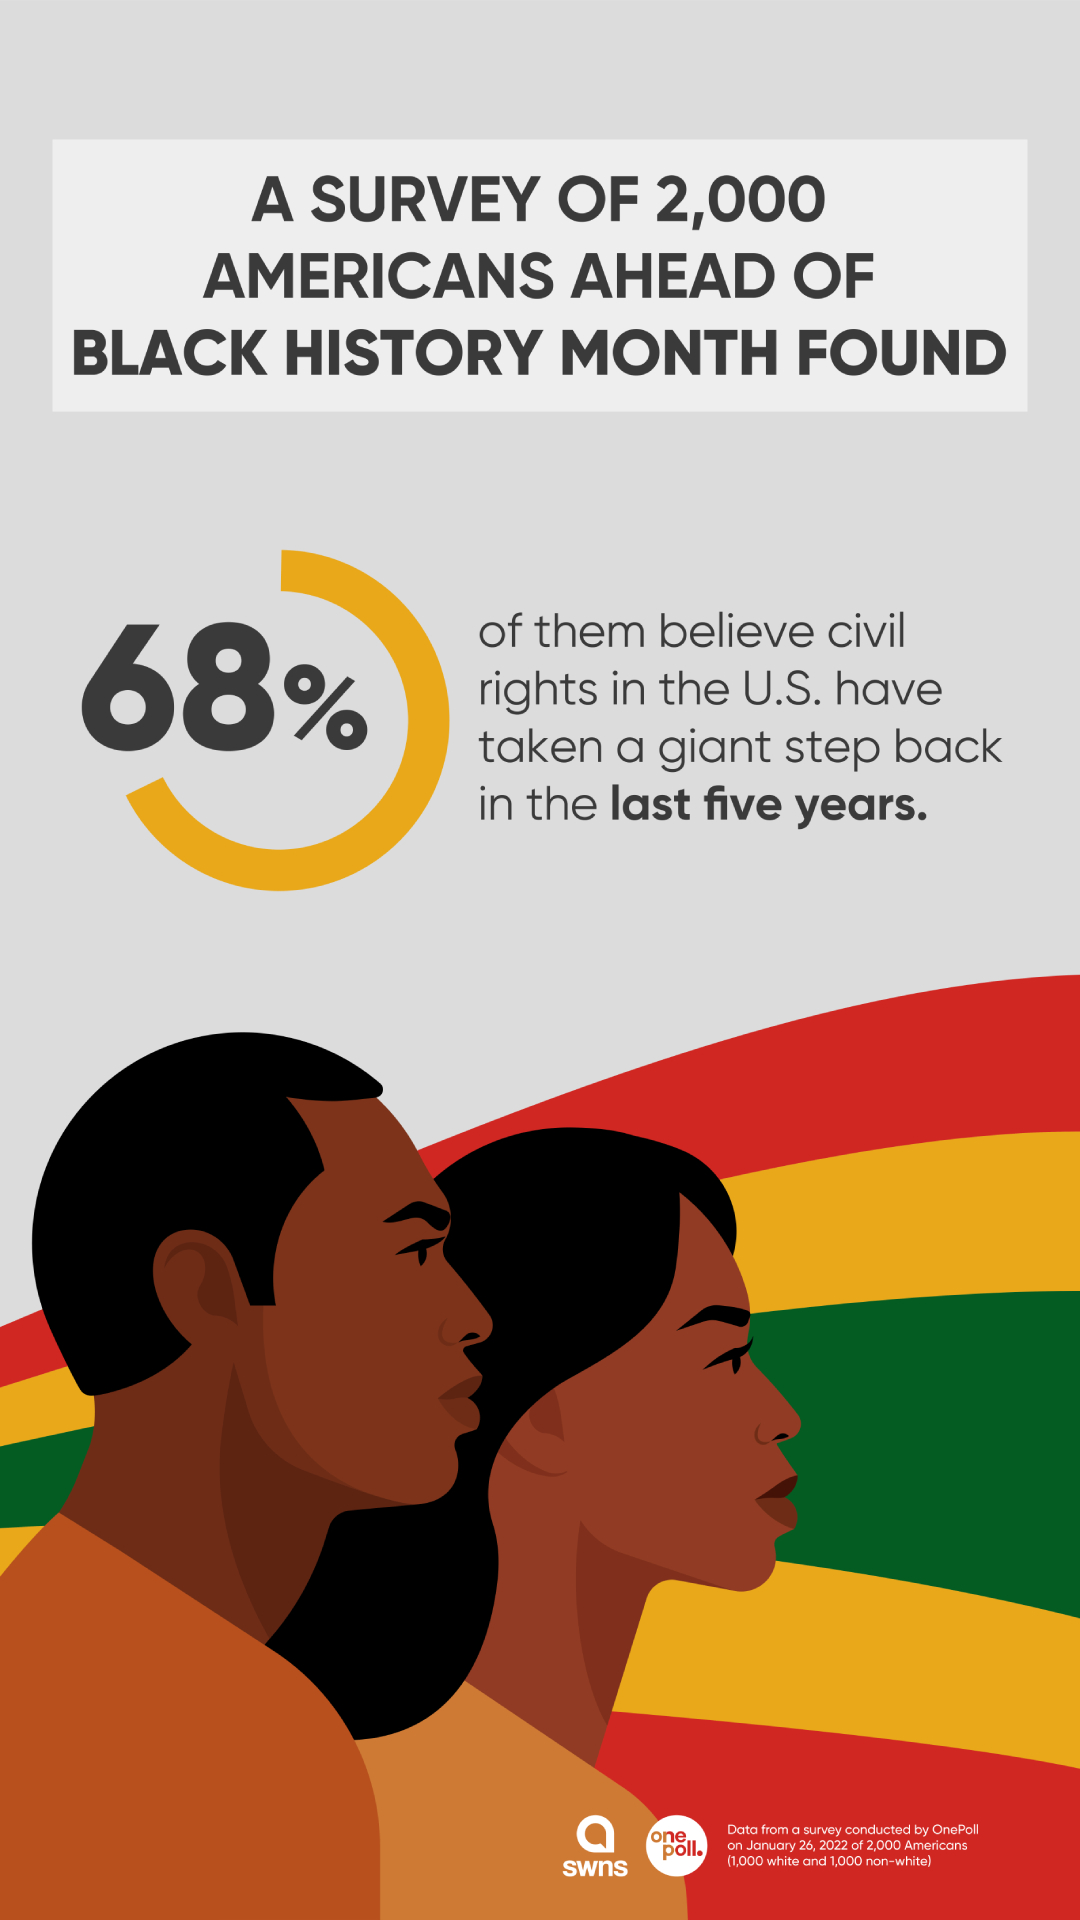 Black History Month OnePoll survey: 68% believe civil rights in the U.S. have taken a giant step back